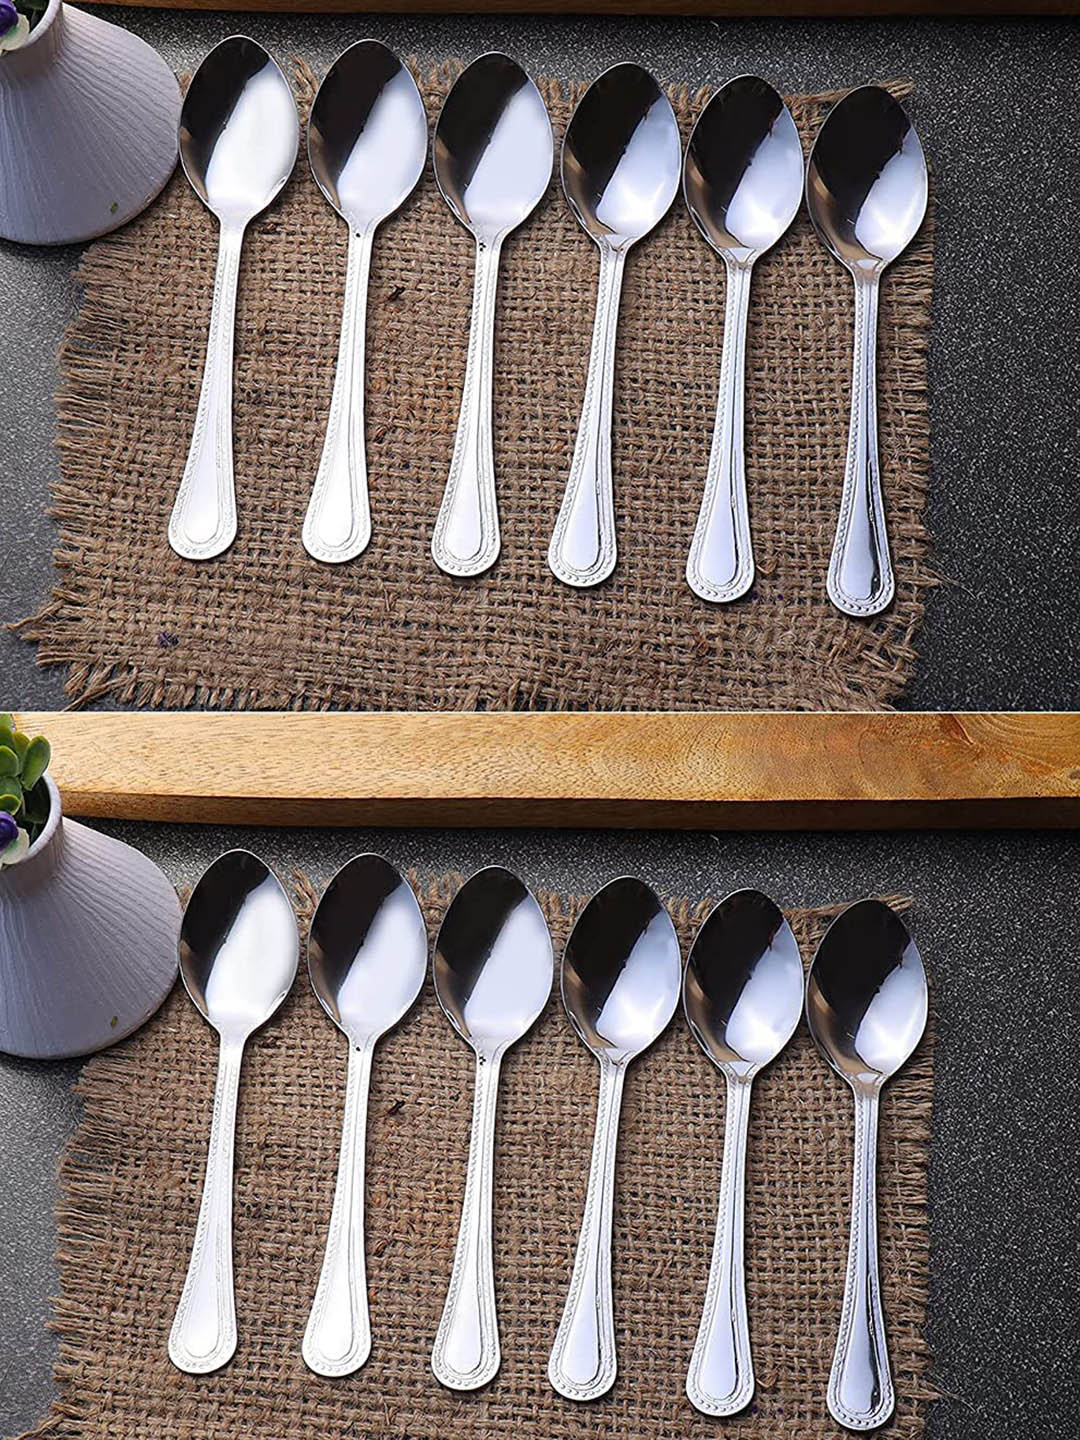 ZEVORA Set Of 12 Silver-Toned Spoon & Fork With Cutlery Holder Price in India